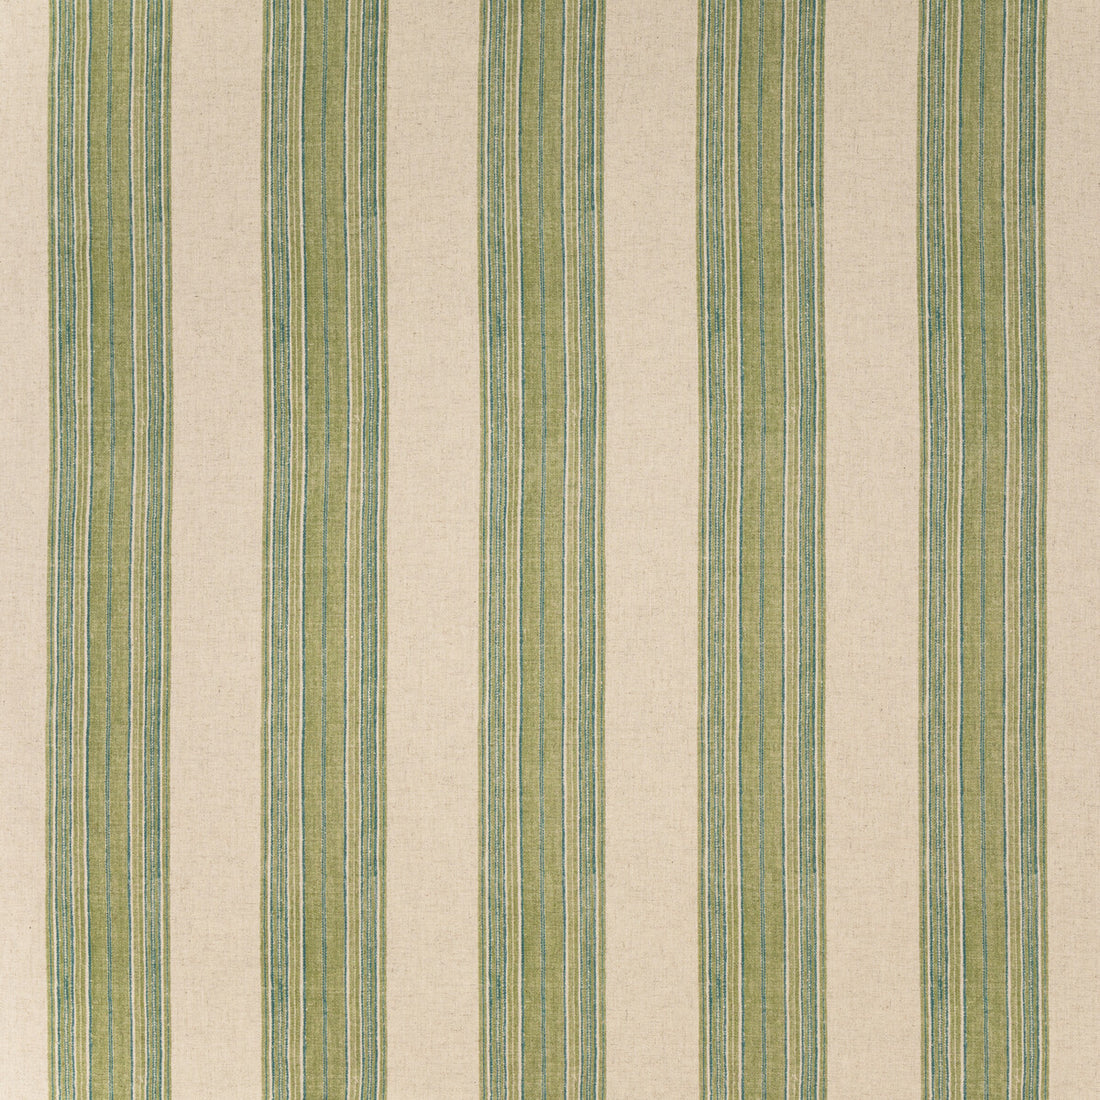 Mifflin Stripe fabric in green color - pattern BFC-3709.3.0 - by Lee Jofa in the Blithfield Eden collection